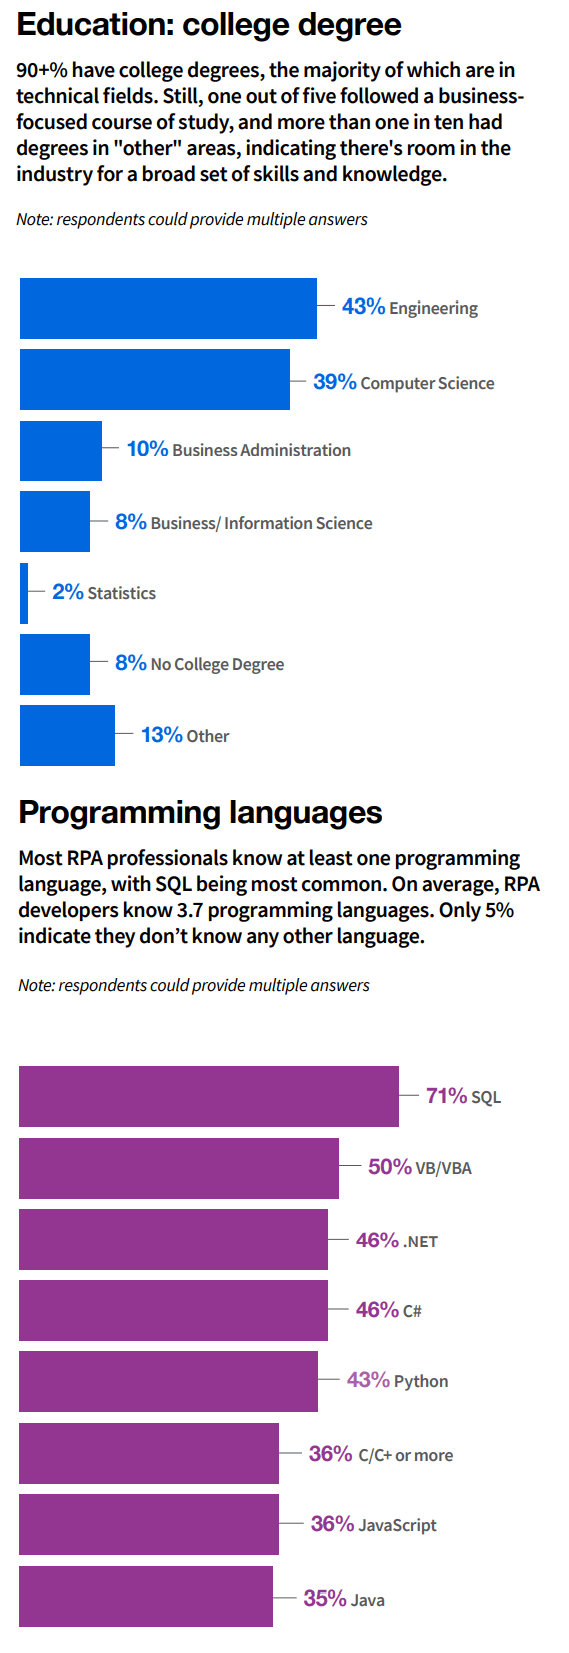 UiPath_2020%20State%20of%20Dev%20Education%20and%20programming%20languages.png